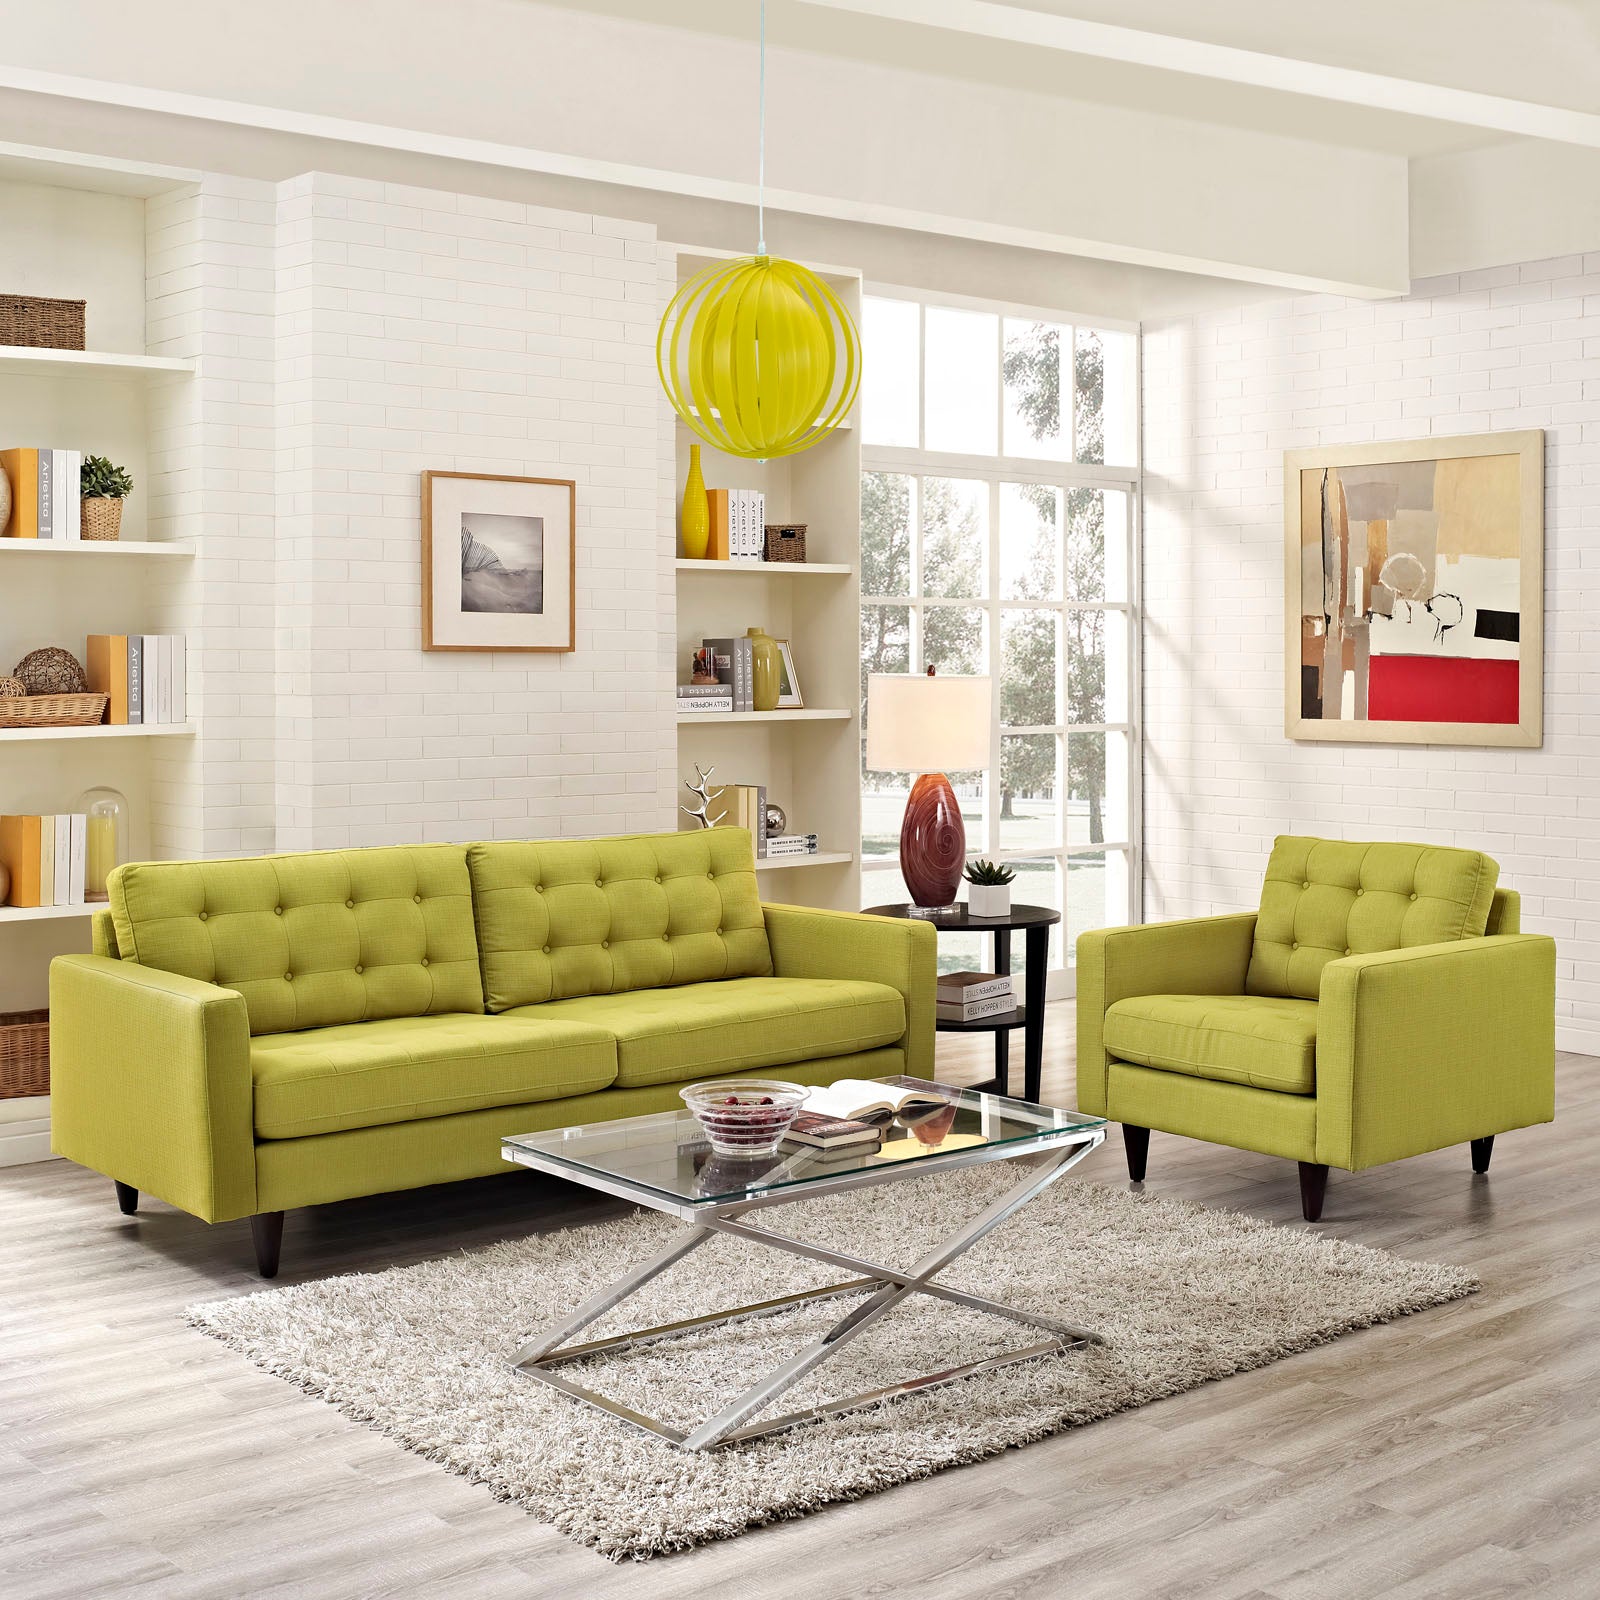 Modway Living Room Sets - Empress Armchair And Sofa Set Of 2 Wheatgrass